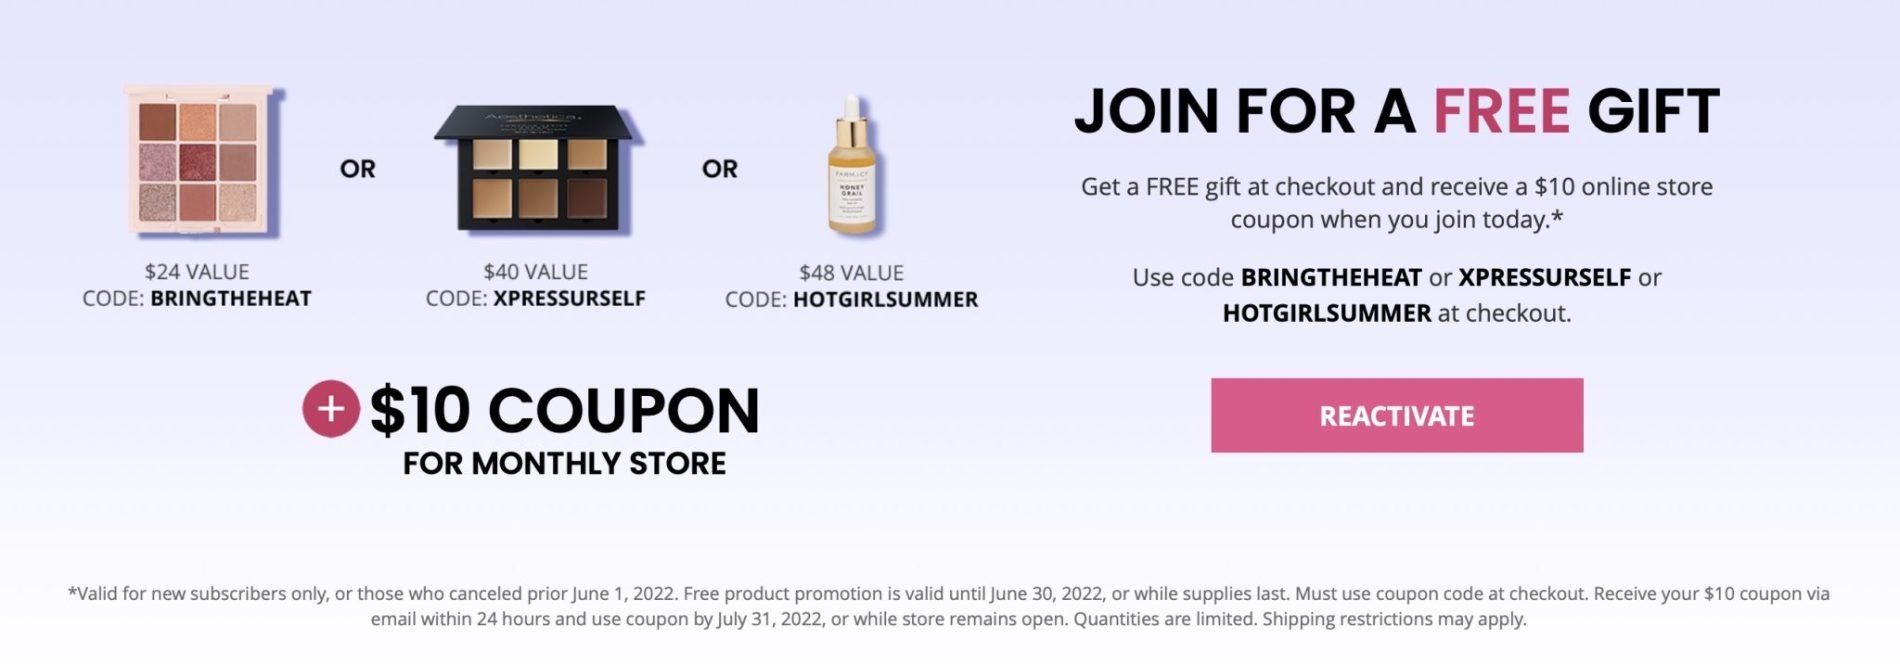 BOXYCHARM June 2022 Coupon Code – Free Gift with Purchase + $10 Pop-Up Credit!